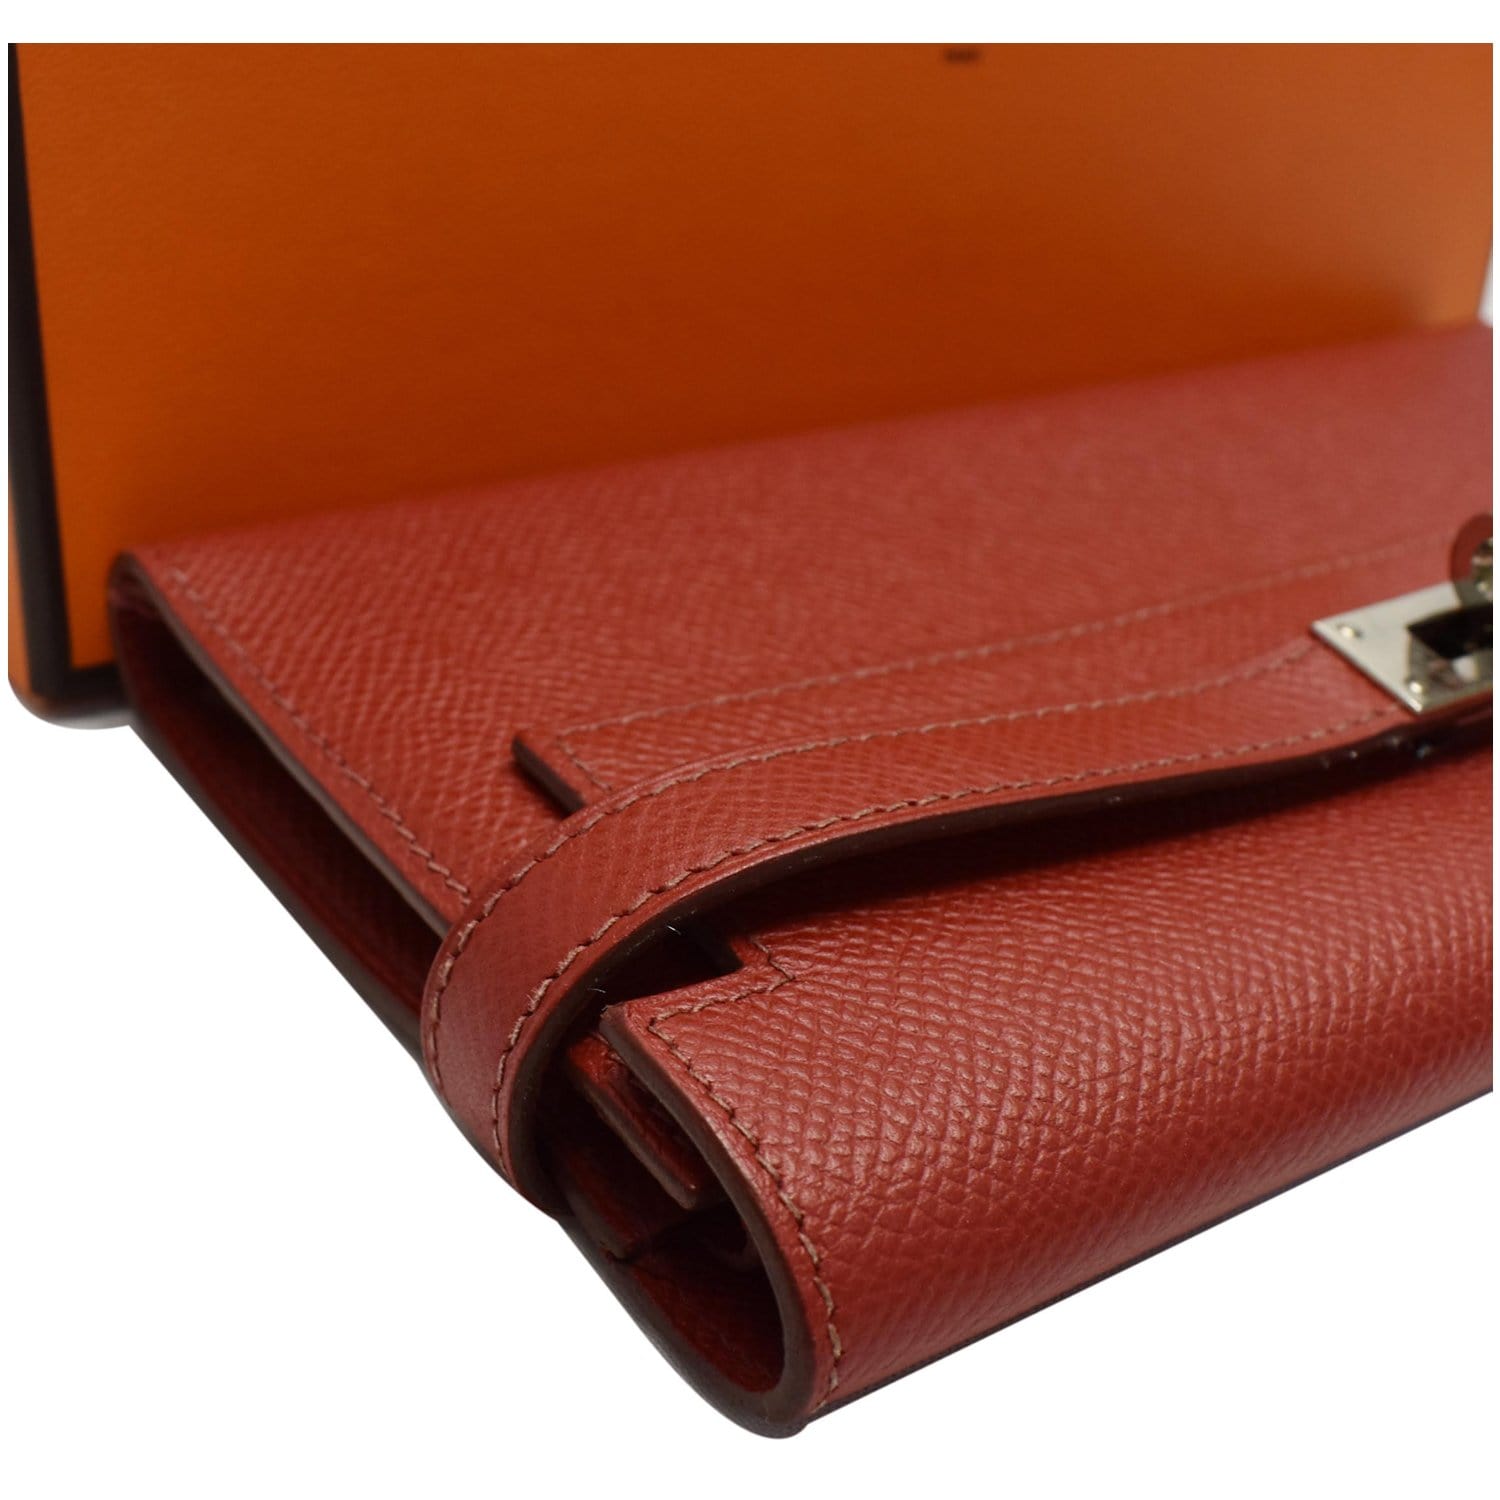 Kelly dépêches leather handbag Hermès Red in Leather - 34118072